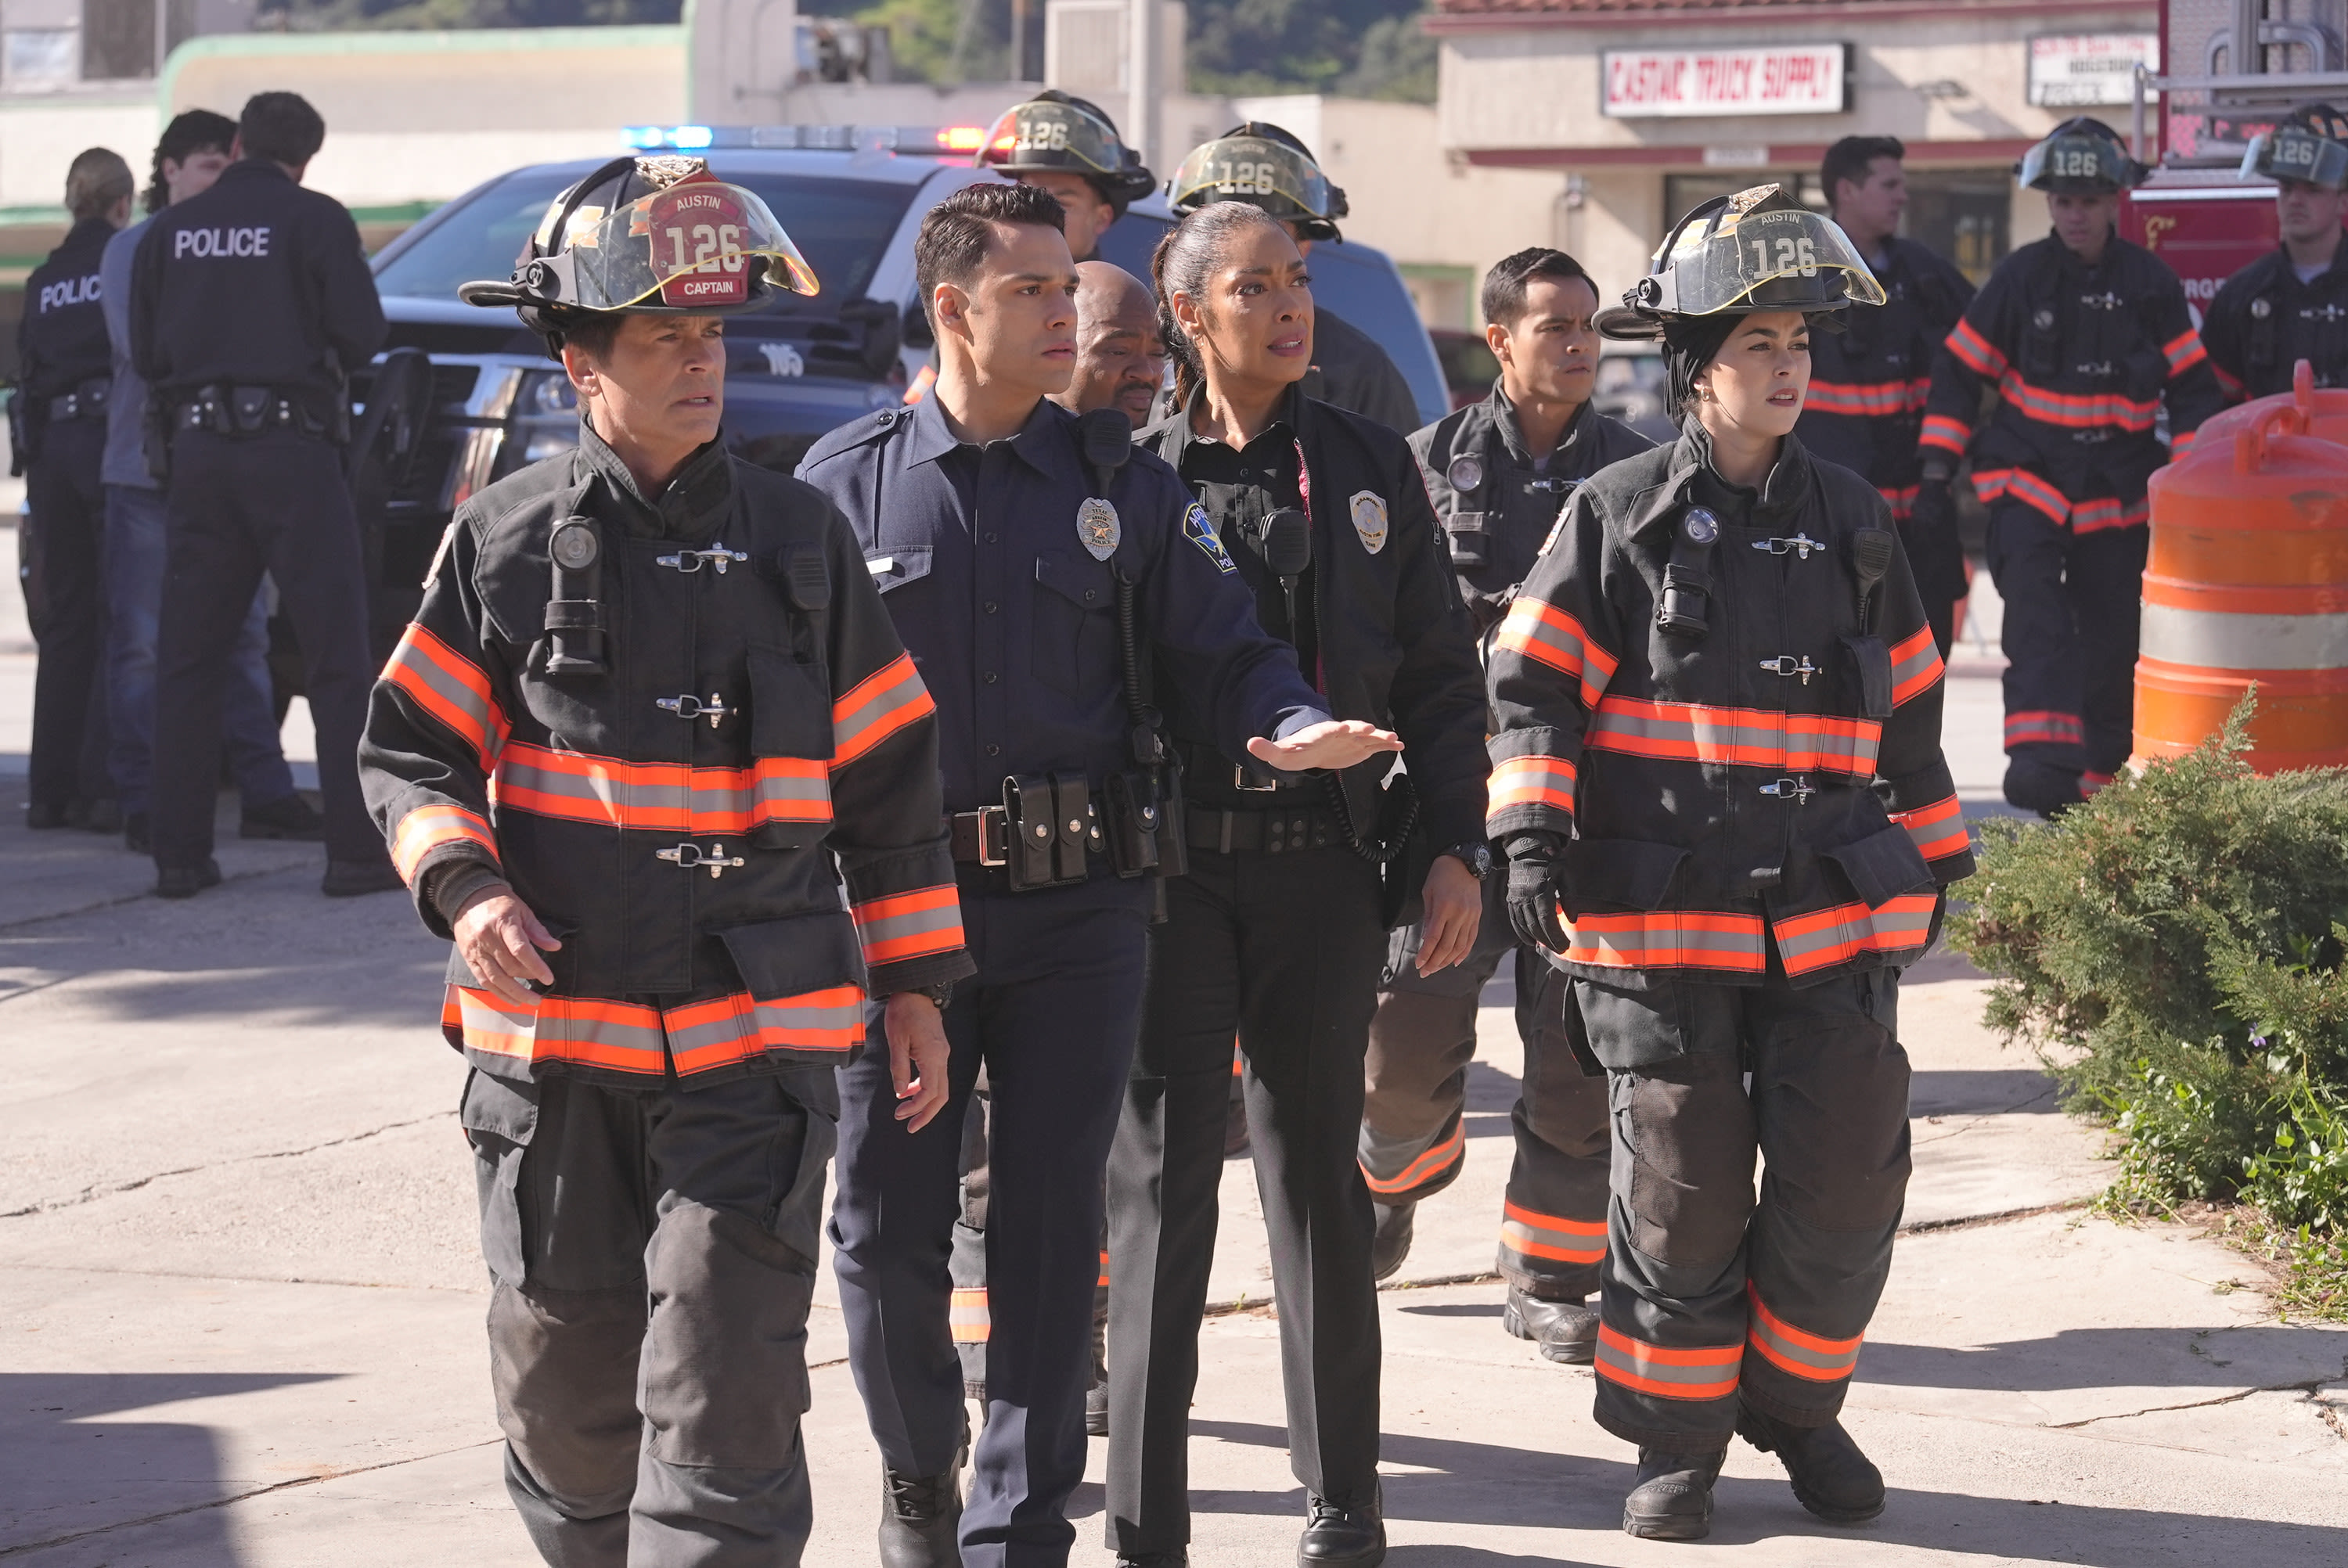 ‘9-1-1: Lone Star’ May Be Coming To An End; Original Cast Member Exits Fox Drama Ahead Of Season 5